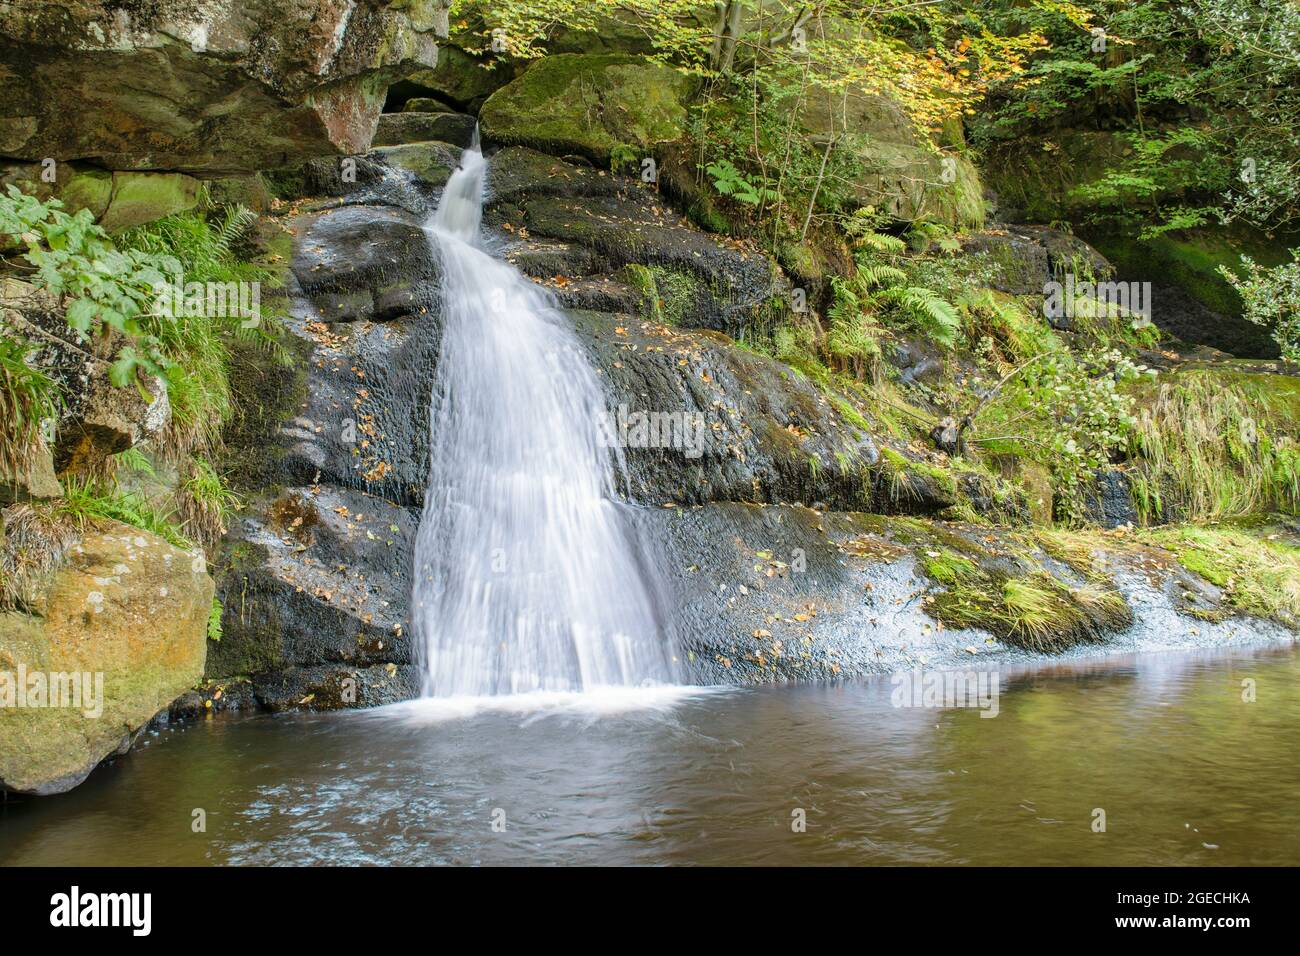 Posforth Gill Upper Waterfall, Bolton Abbey, Yorkshire Dales. Stockfoto